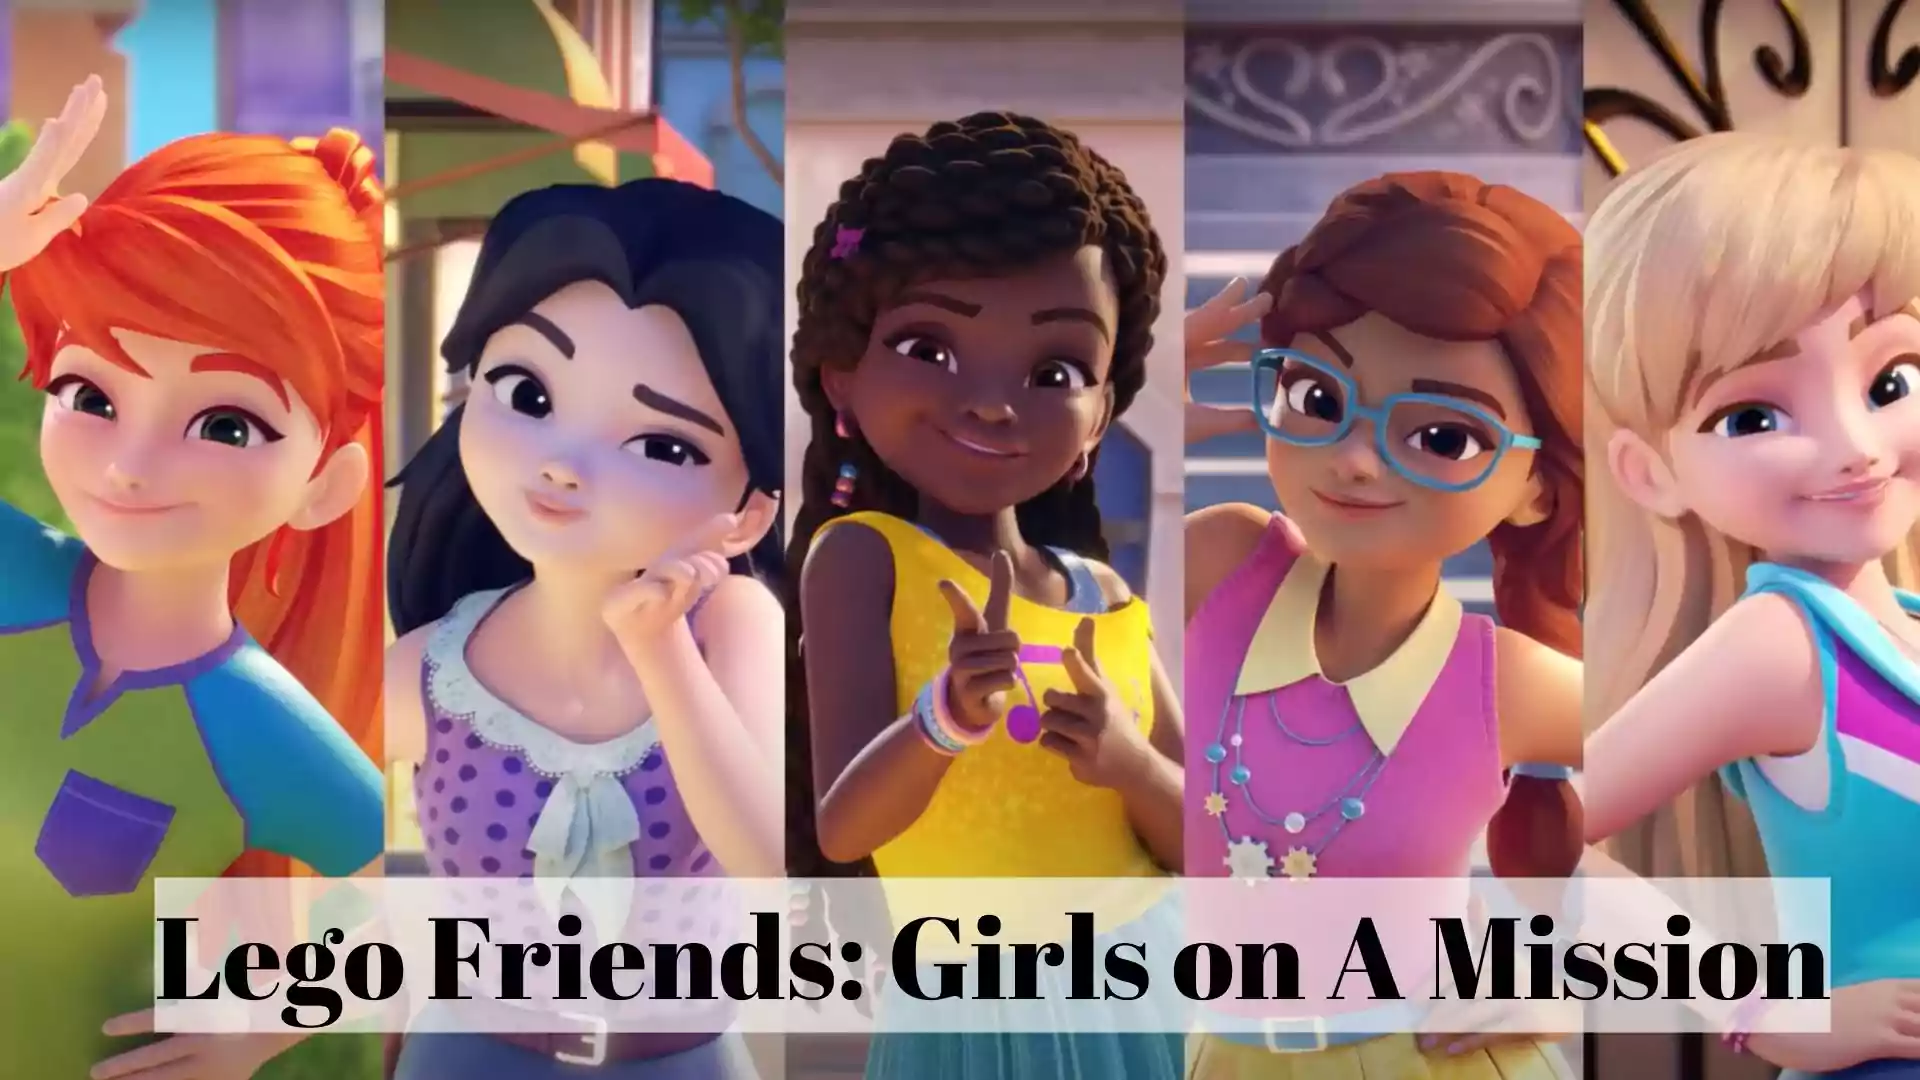 Lego Friends Girls on A Mission Wallpaper and Image